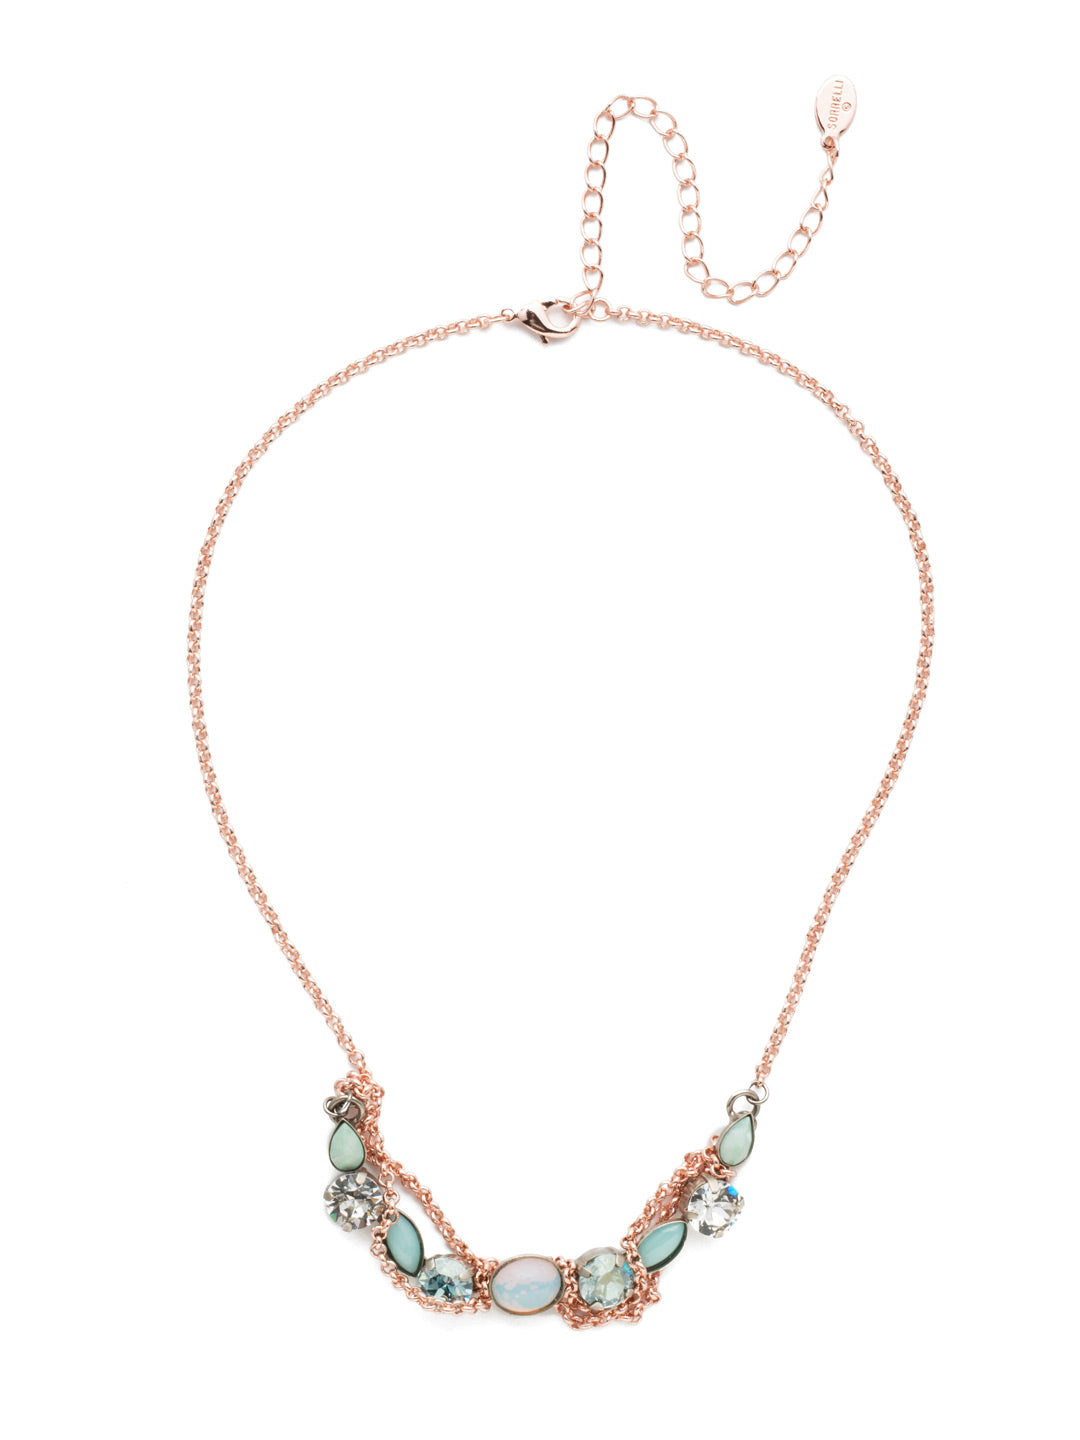 Melrose Tennis Necklace - NET16MXCAZ - <p>Our Melrose Tennis Necklace intertwines the metal chain trend with our signature sparkling Sorrelli crystals in an assortment of shapes and varying levels of shine. From Sorrelli's Crystal Azure collection in our Mixed Metal finish.</p>